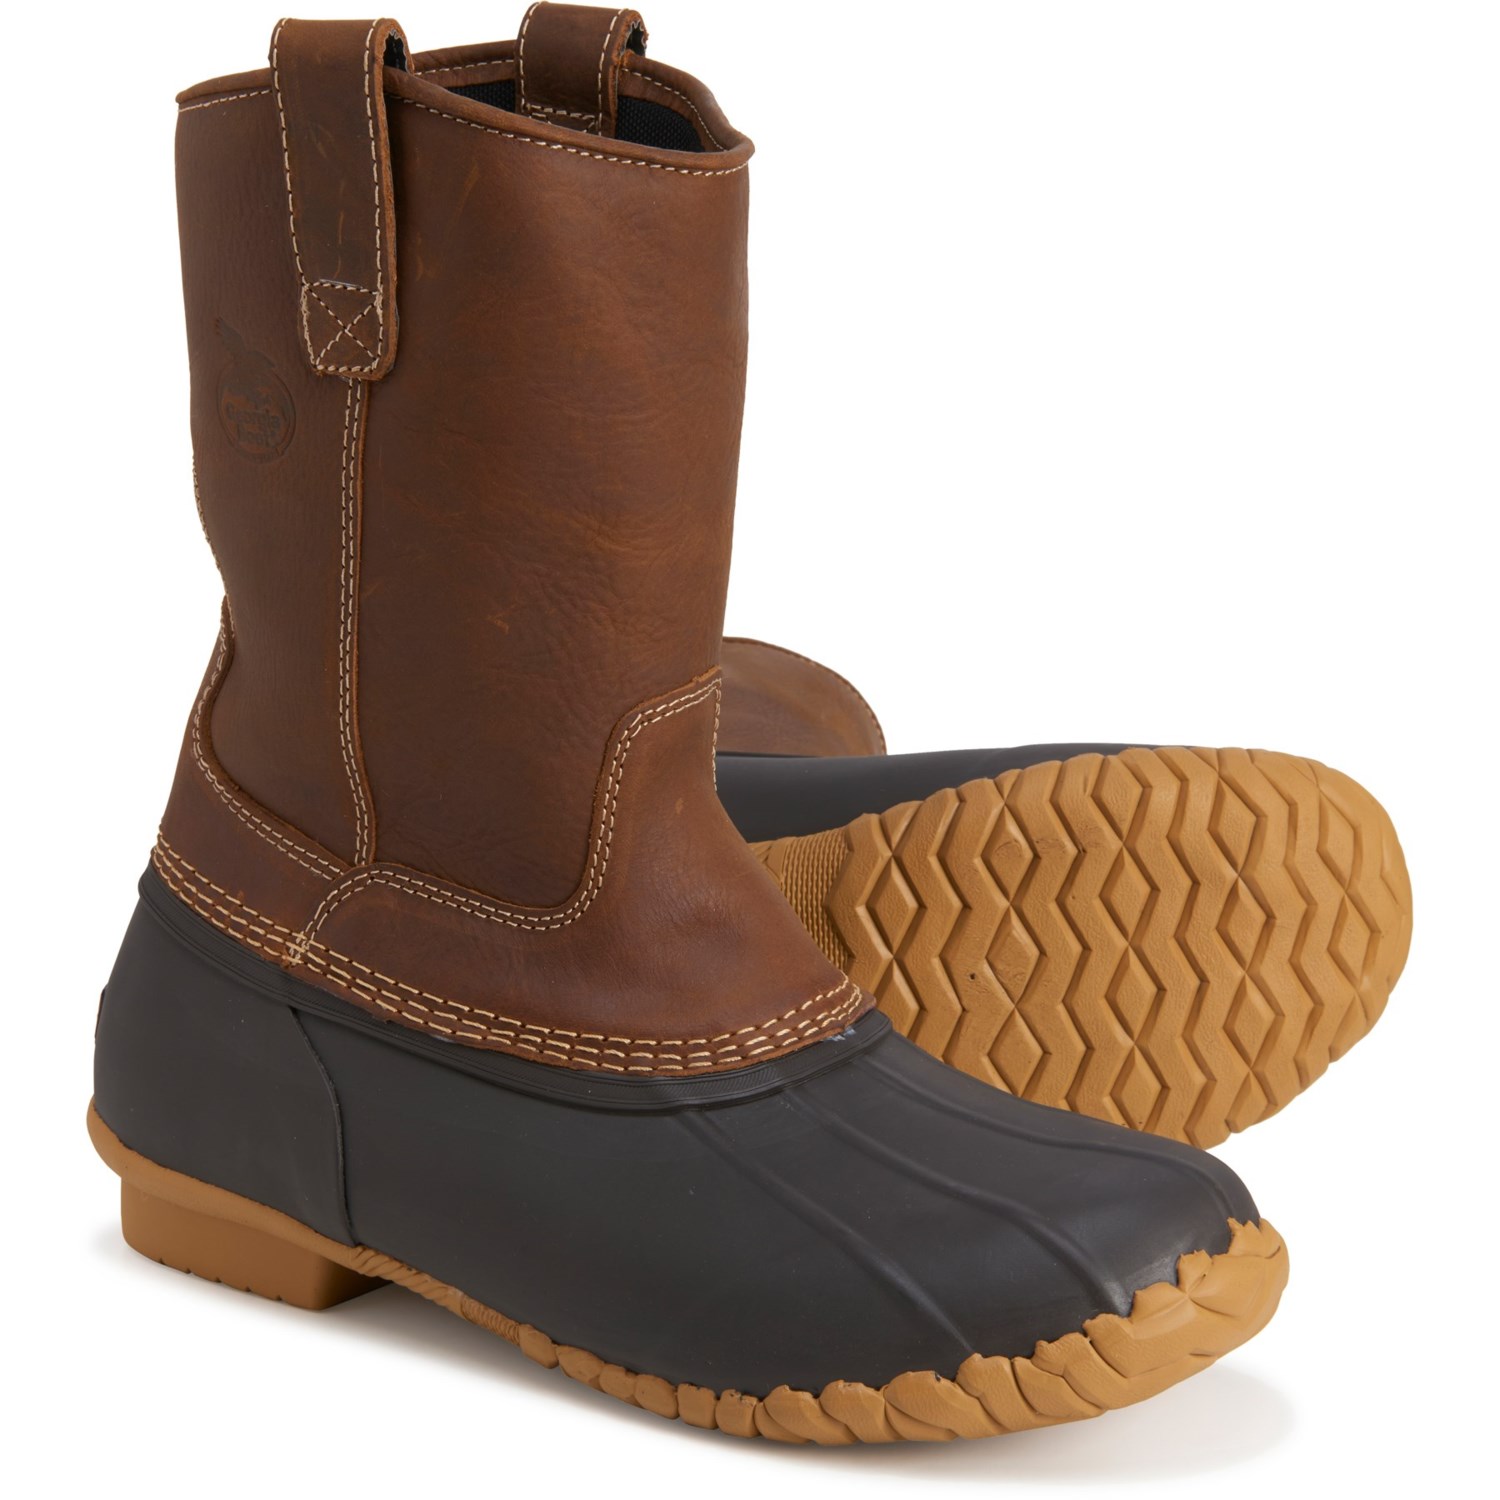 Georgia Boot Marshland Pull-On Duck Boots (For Men) - Save 36%